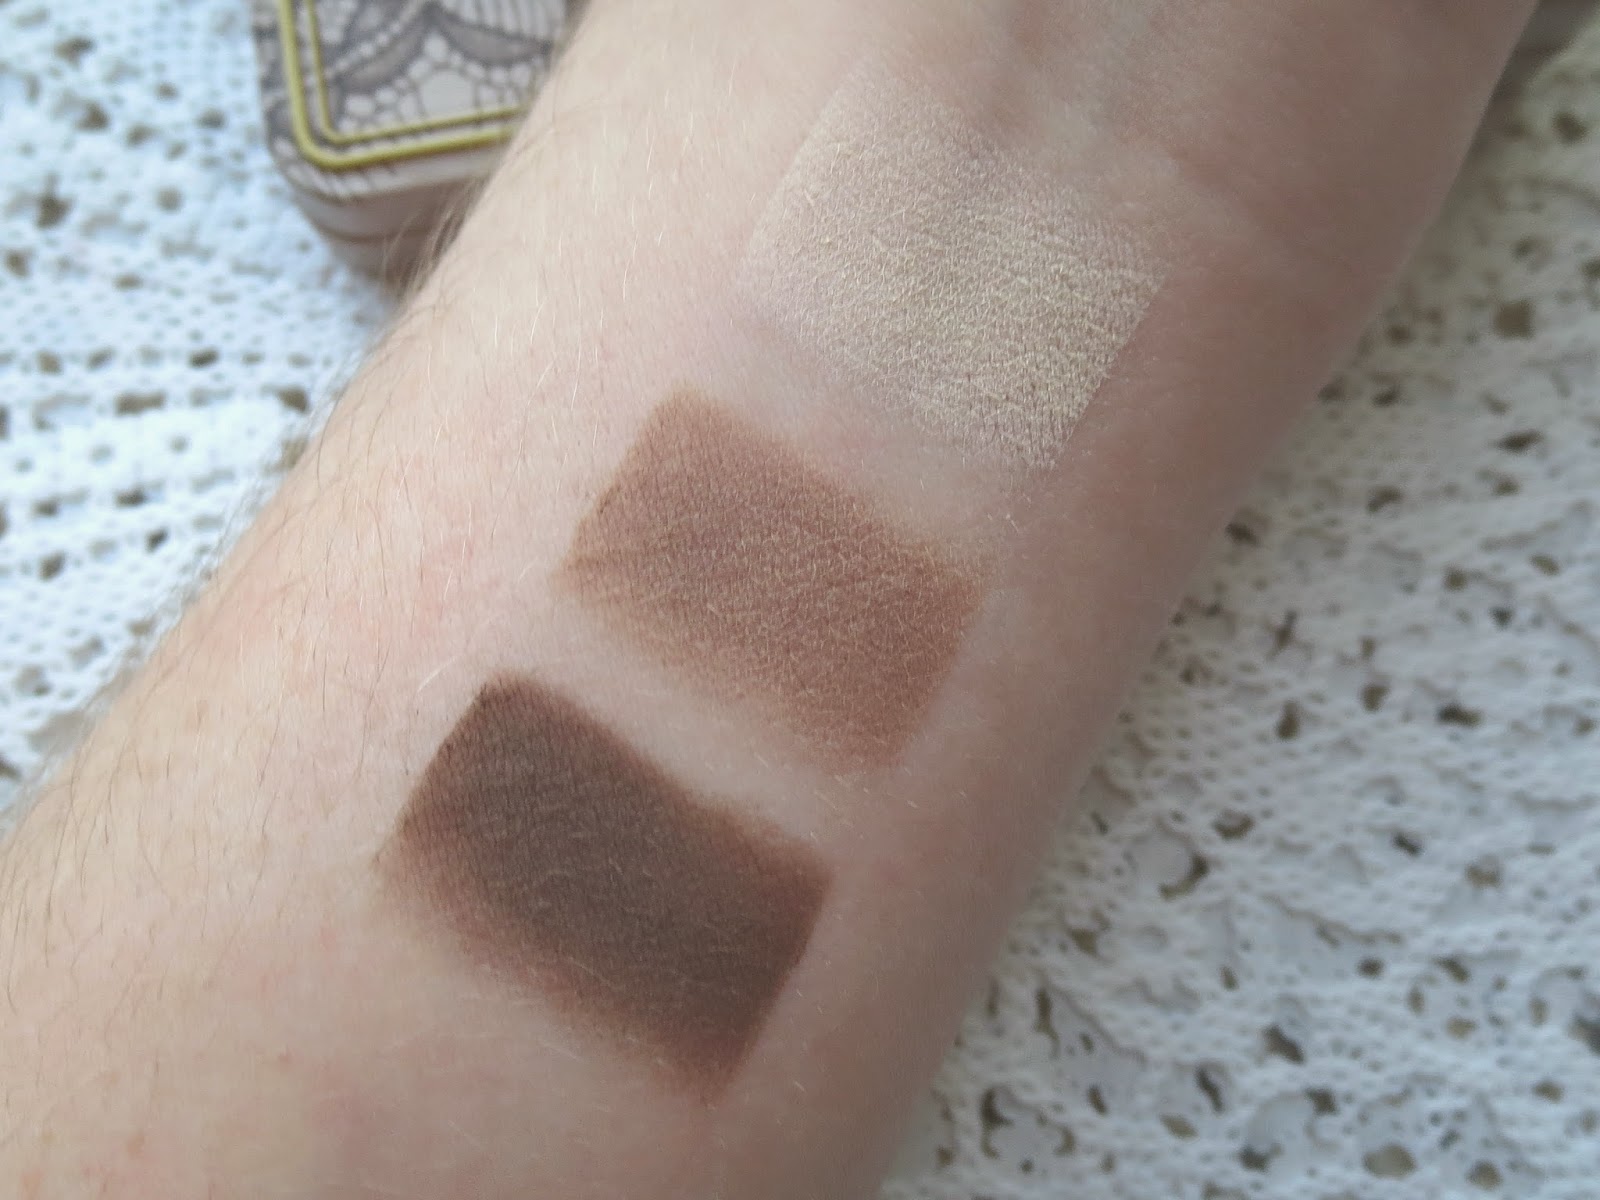 a picture of Too Faced Natural Matte palette swatch ; Sexpresso, Cahsmere Bunny, Heaven